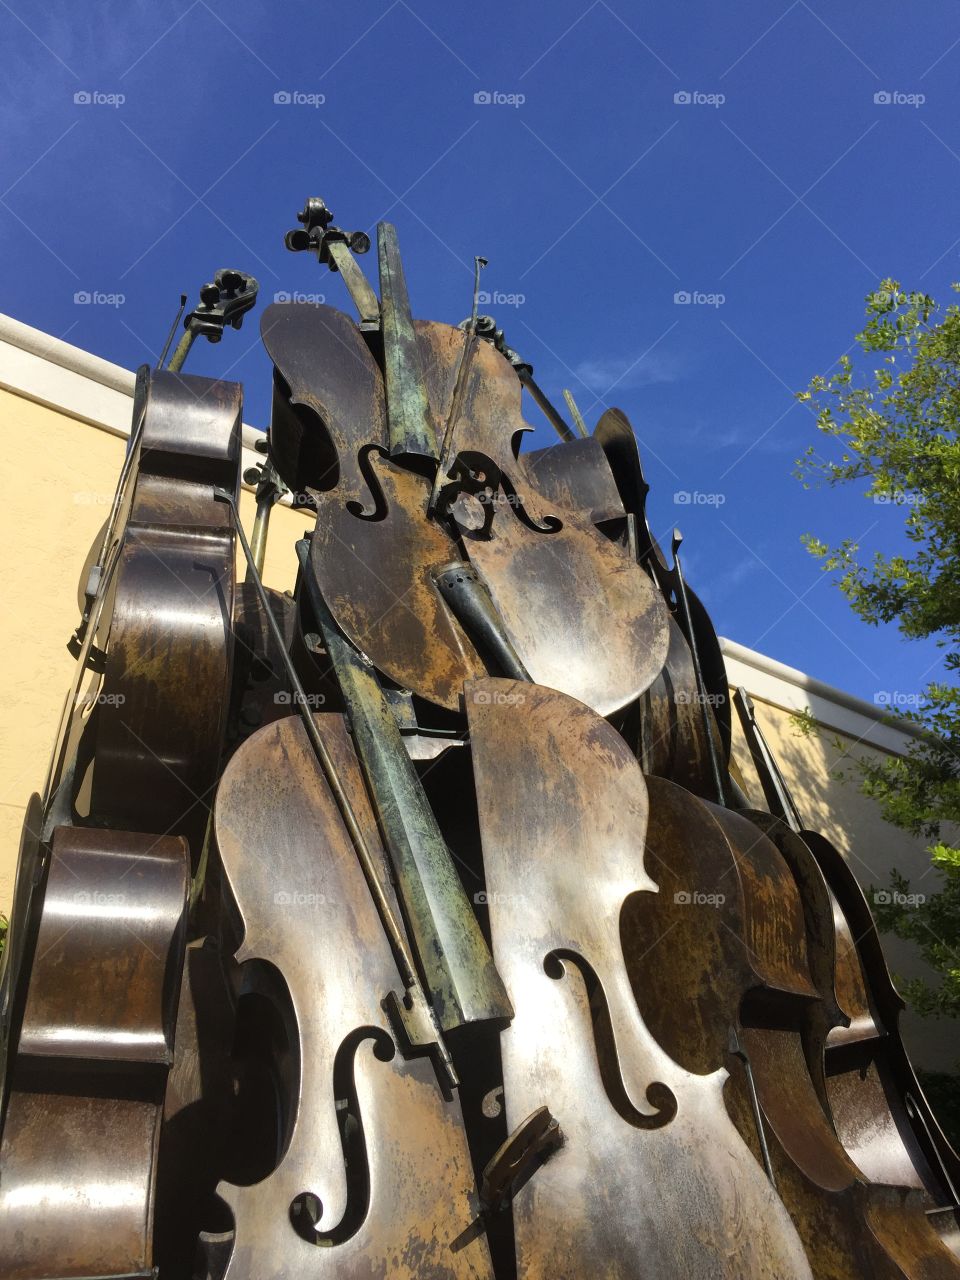 Boca Raton Museum of art . Sculpture with cellos made in bronze 